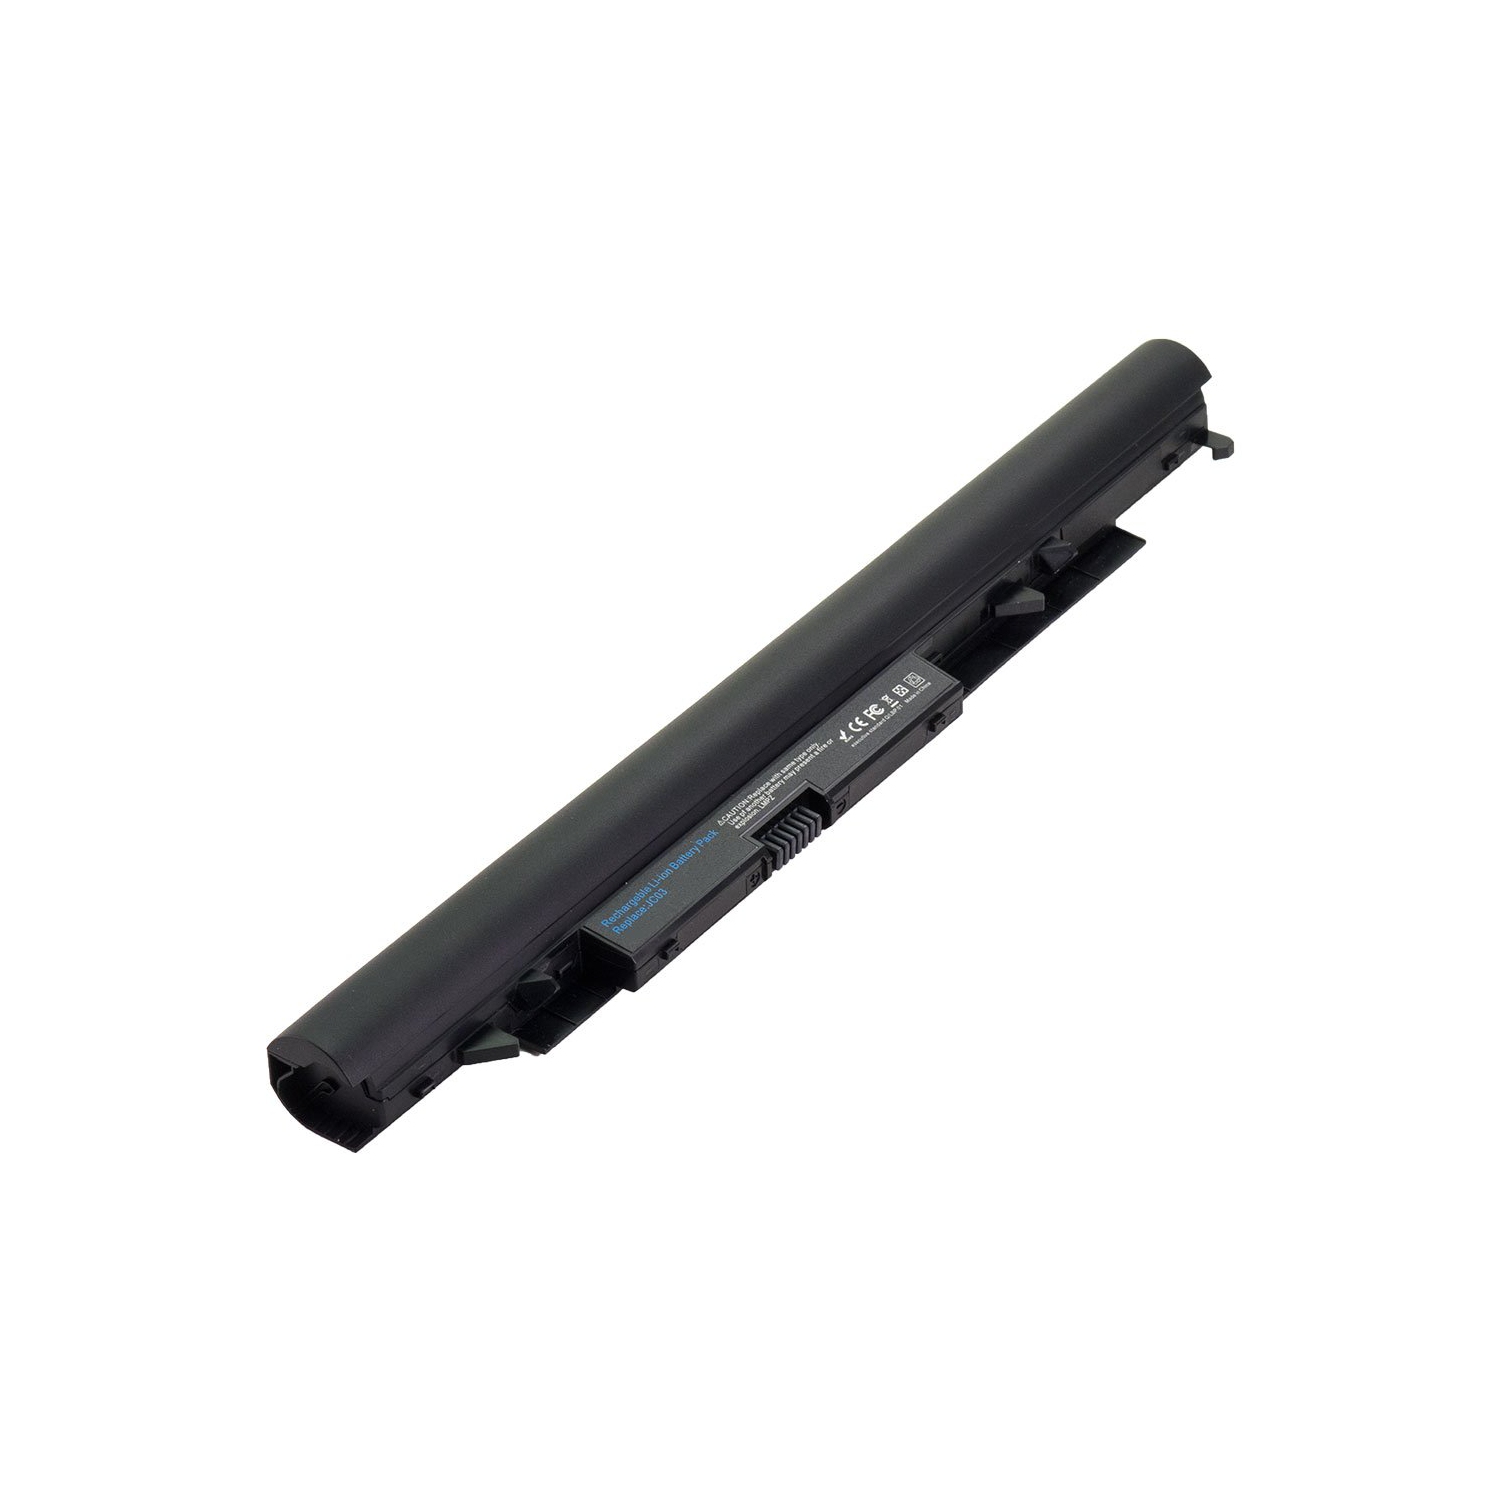 Laptop Battery Replacement for HP 250 G6 1NW57UT, 2LP34AA, 919682-421, HSTNN-DB8A, JC03, JCO4, TPN-Q186, TPN-W130